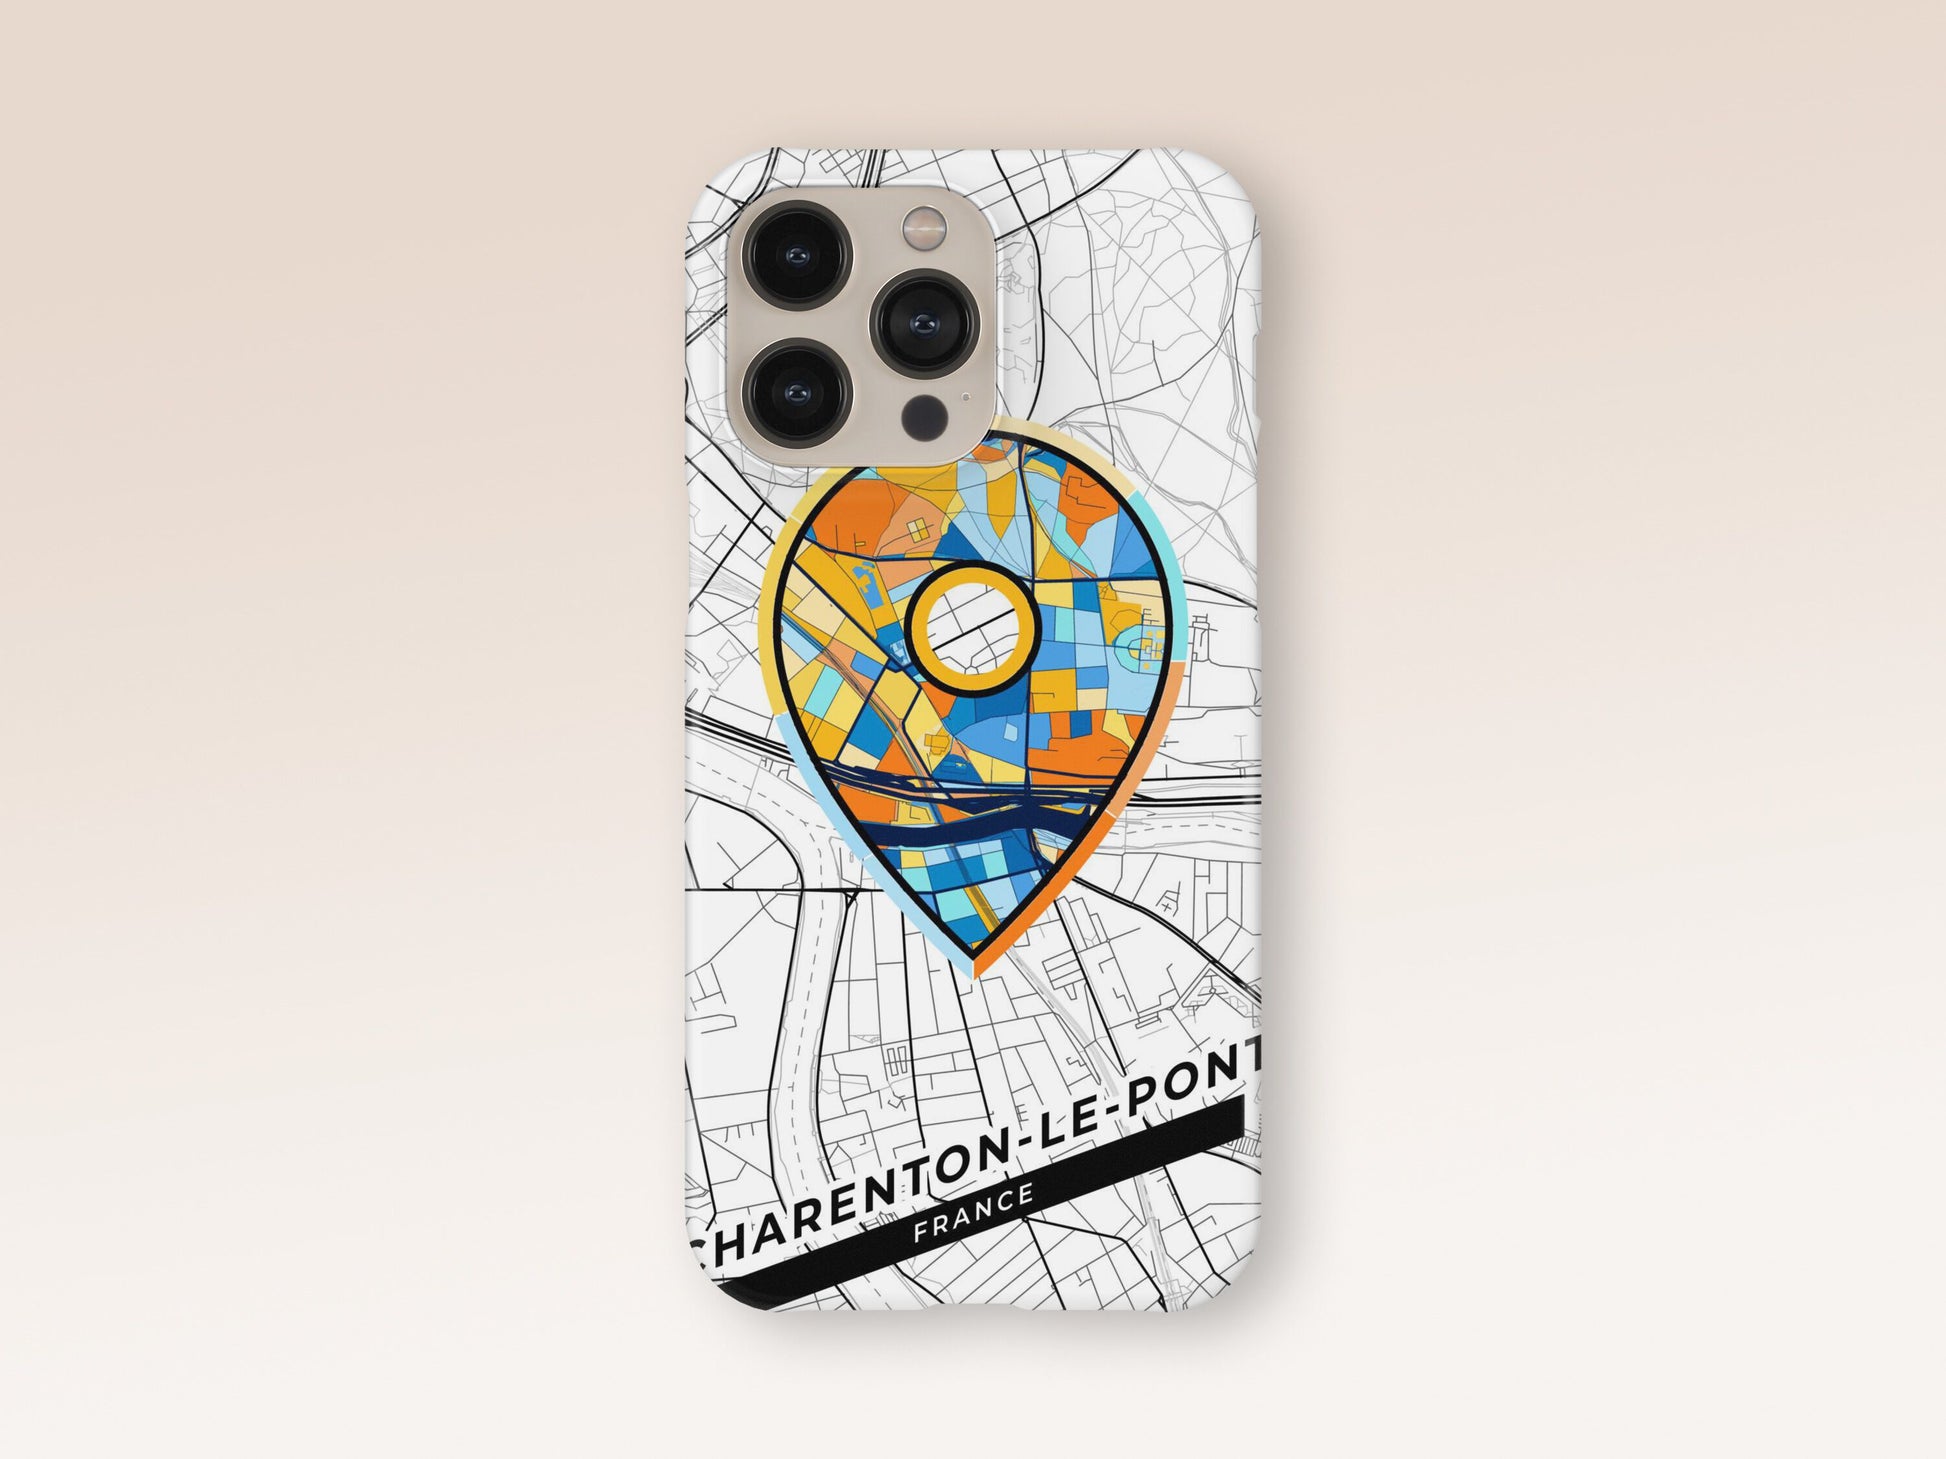 Charenton-Le-Pont France slim phone case with colorful icon. Birthday, wedding or housewarming gift. Couple match cases. 1